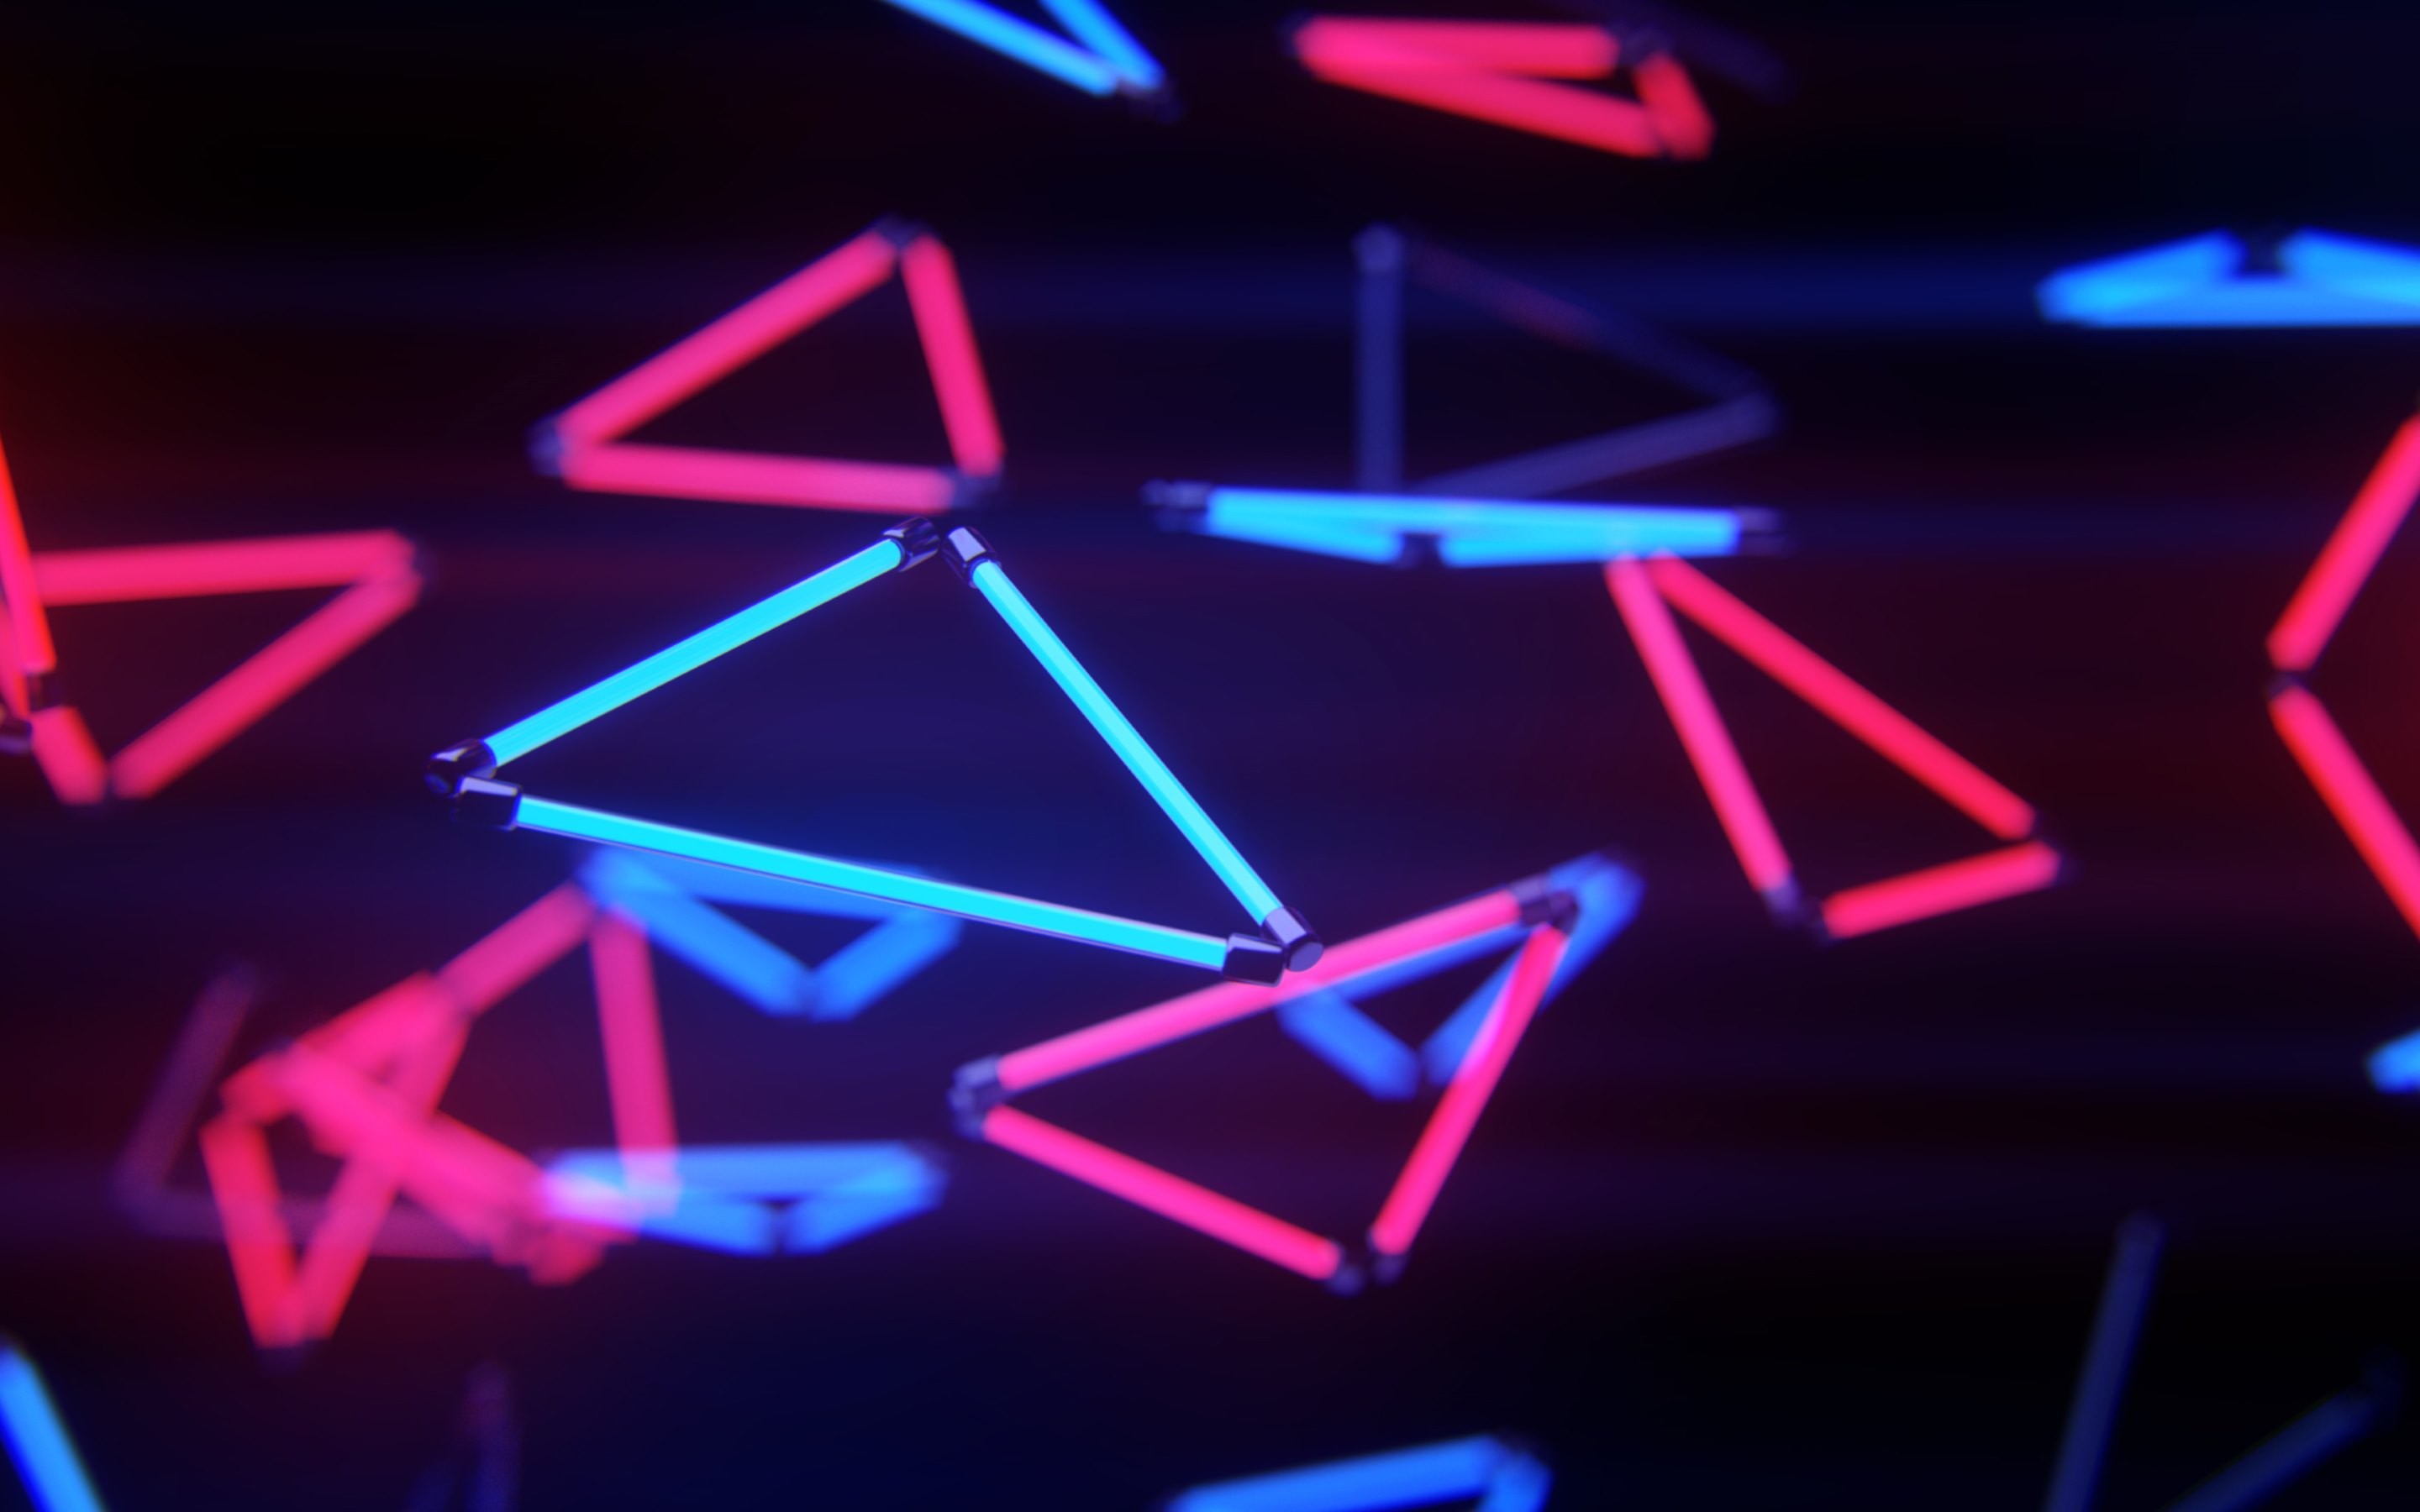 Wallpaper, lights, digital art, abstract, 3D, rave, music, triangle, neon sign, disco, shape, line, stage, nightclub, font, rock concert, signage 2880x1800